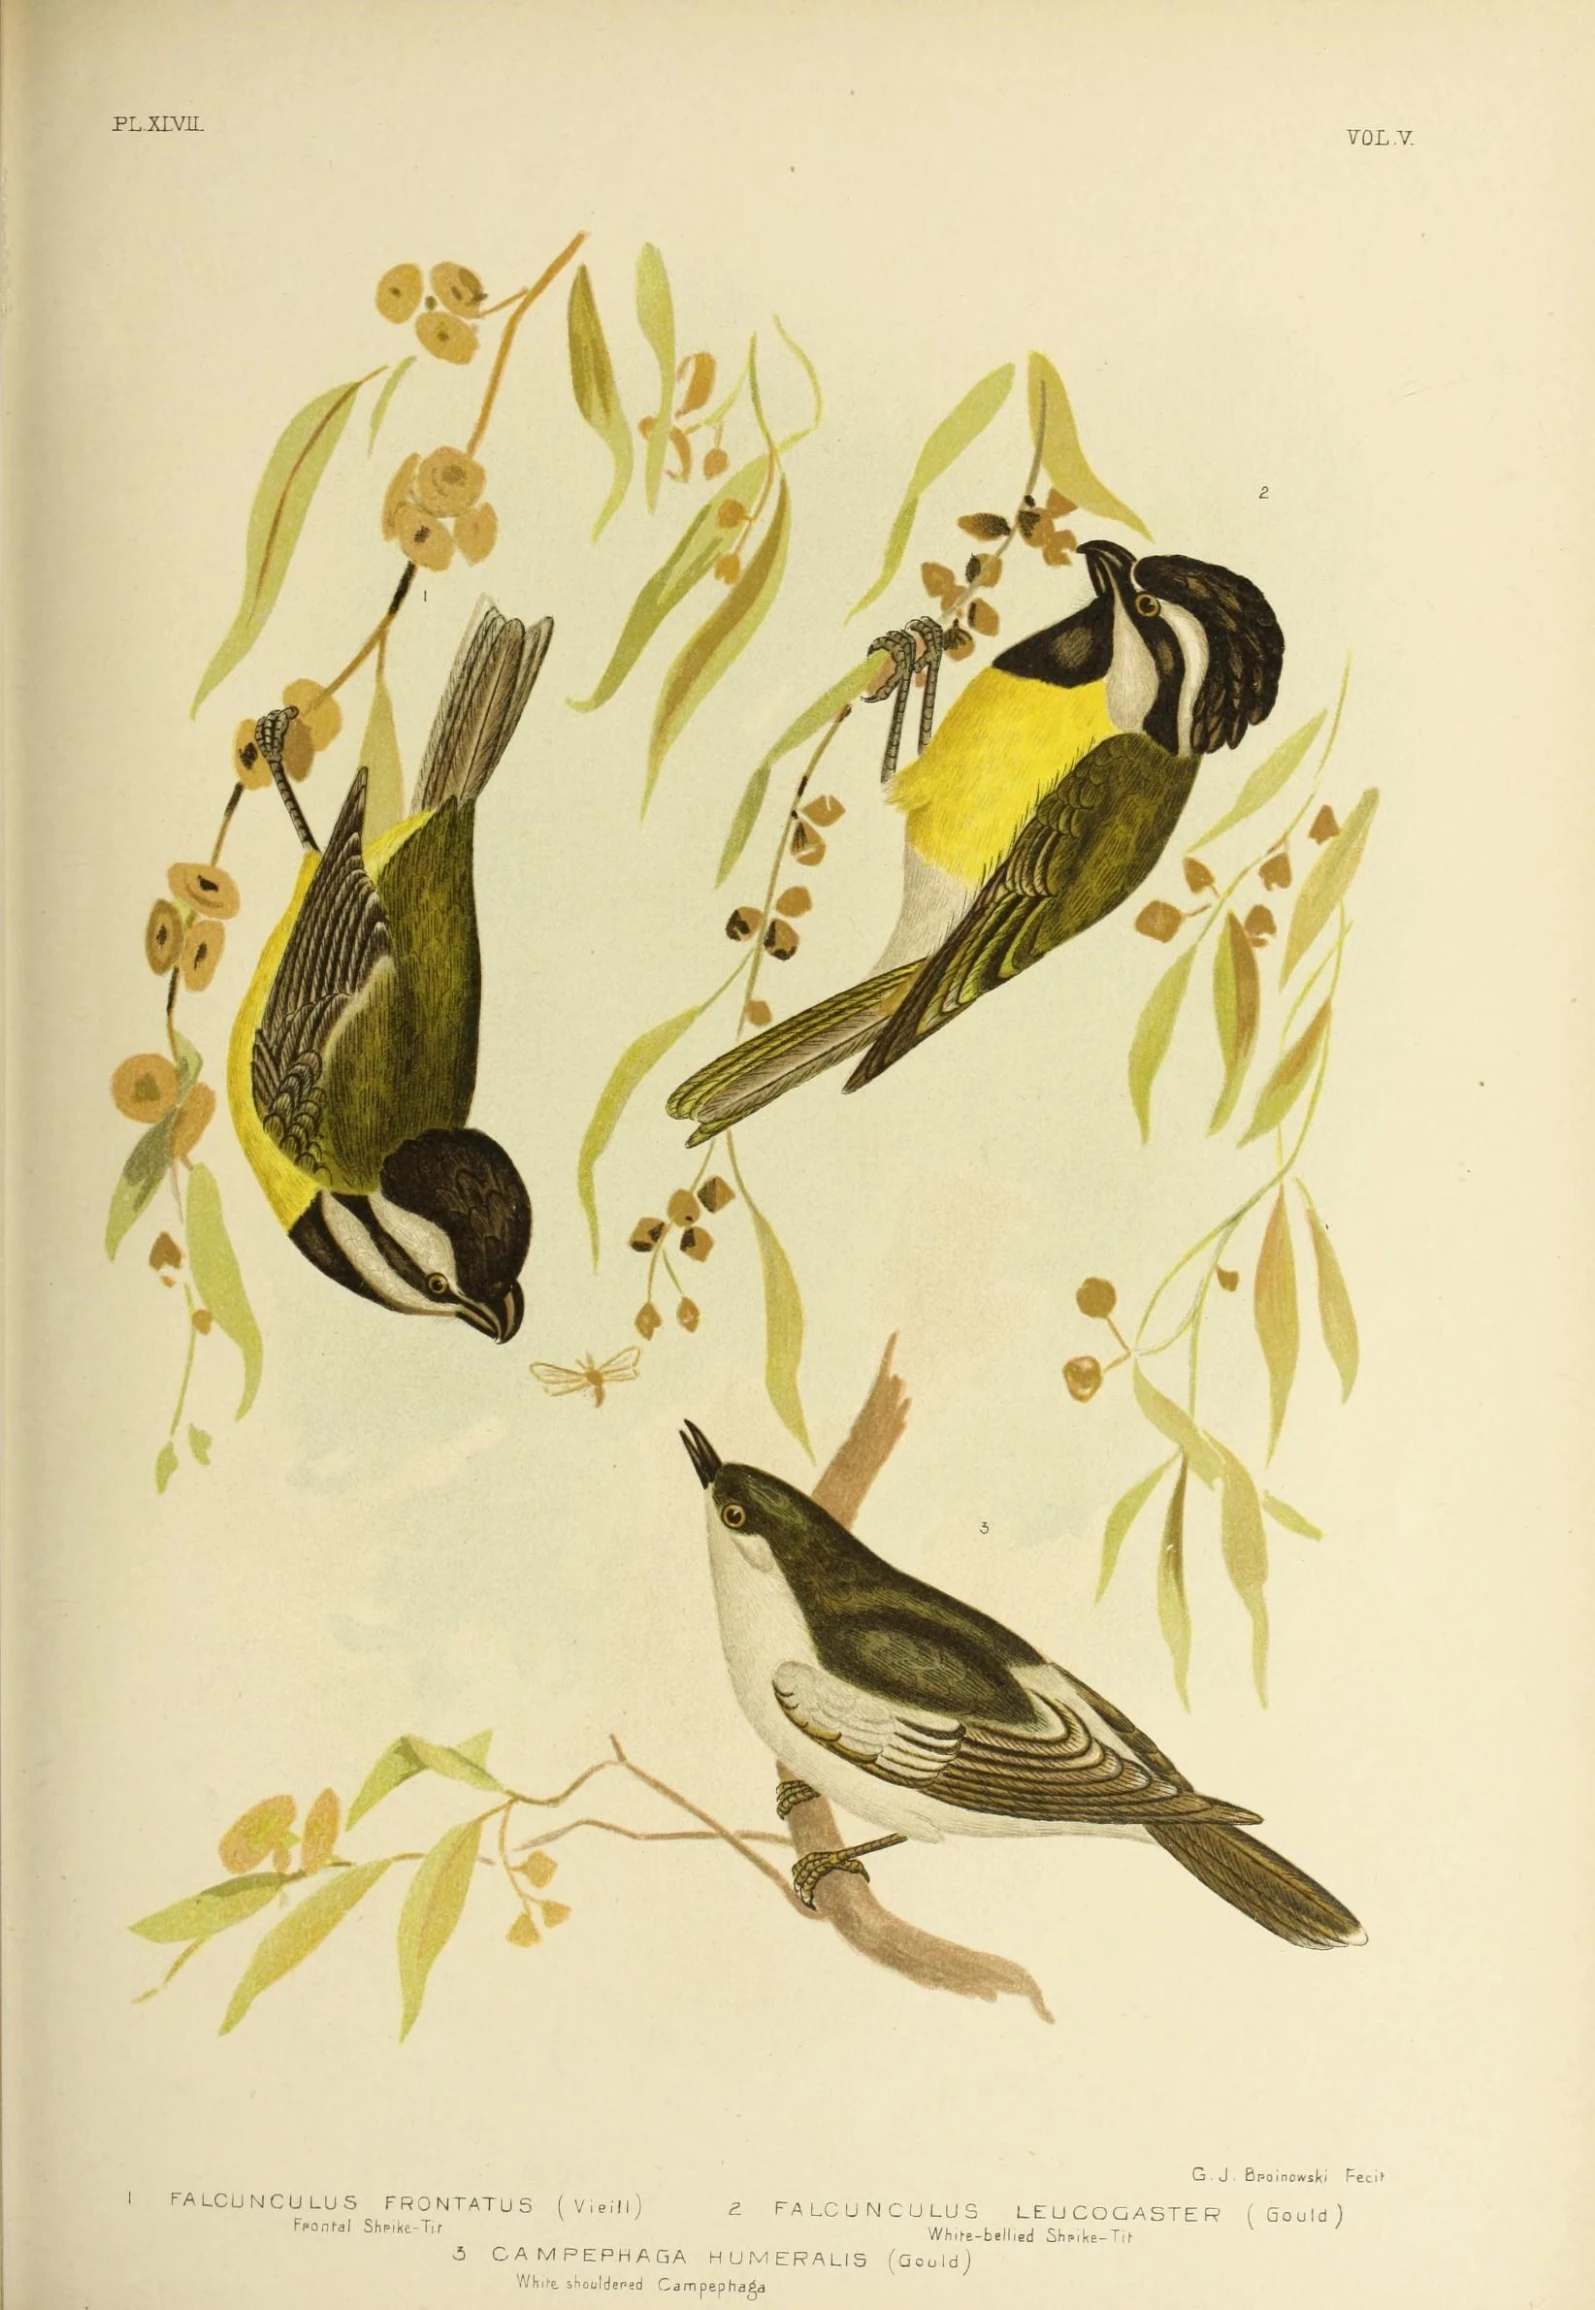 this is a colored illustration of birds standing around on a nch